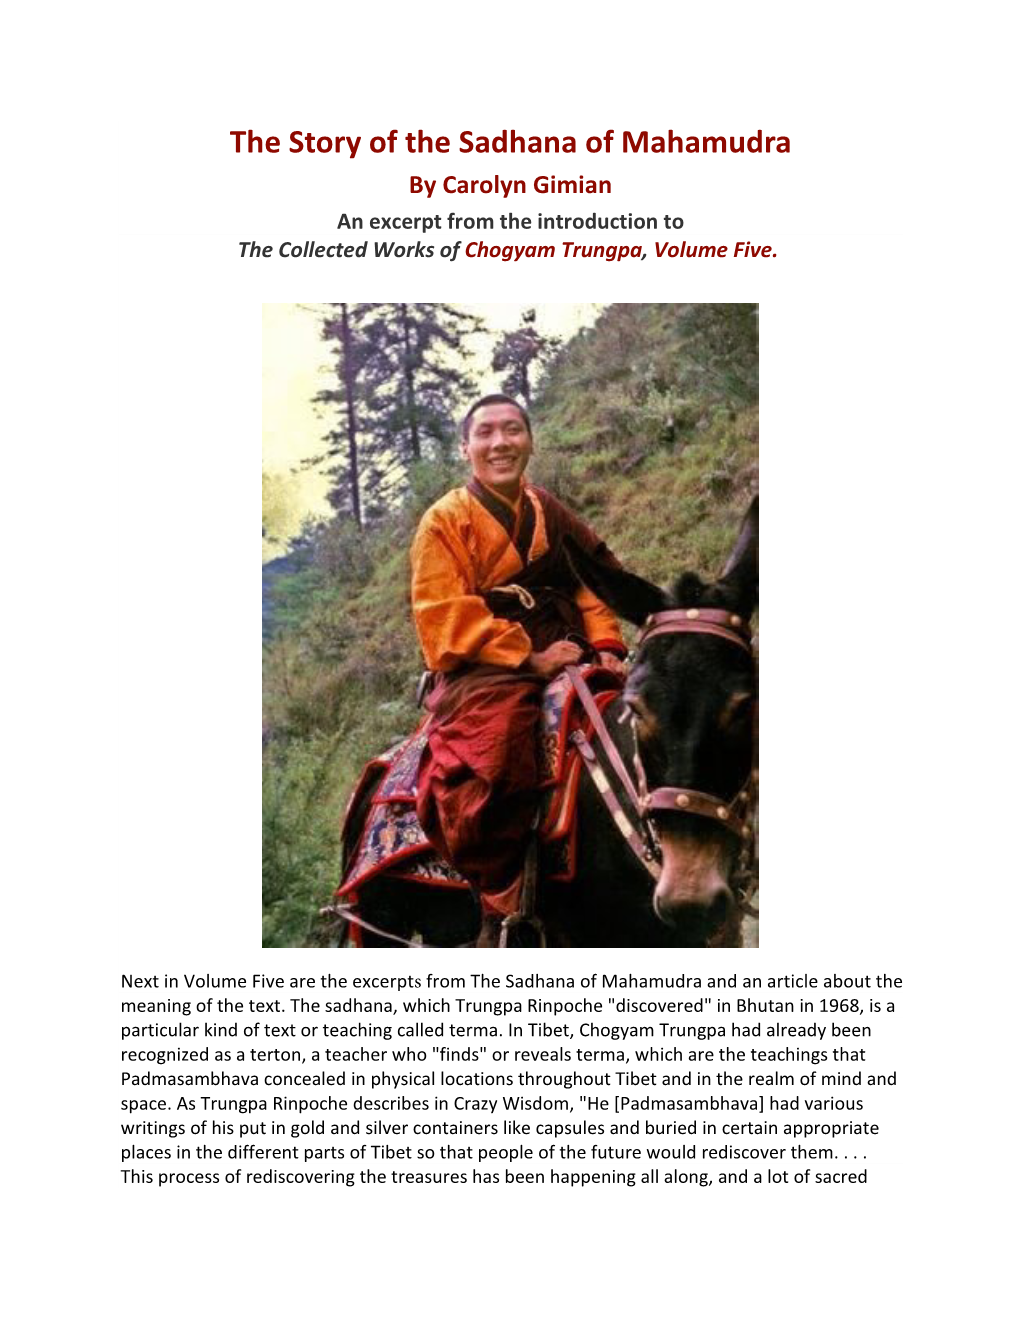 The Story of the Sadhana of Mahamudra by Carolyn Gimian an Excerpt from the Introduction to the Collected Works of Chogyam Trungpa, Volume Five